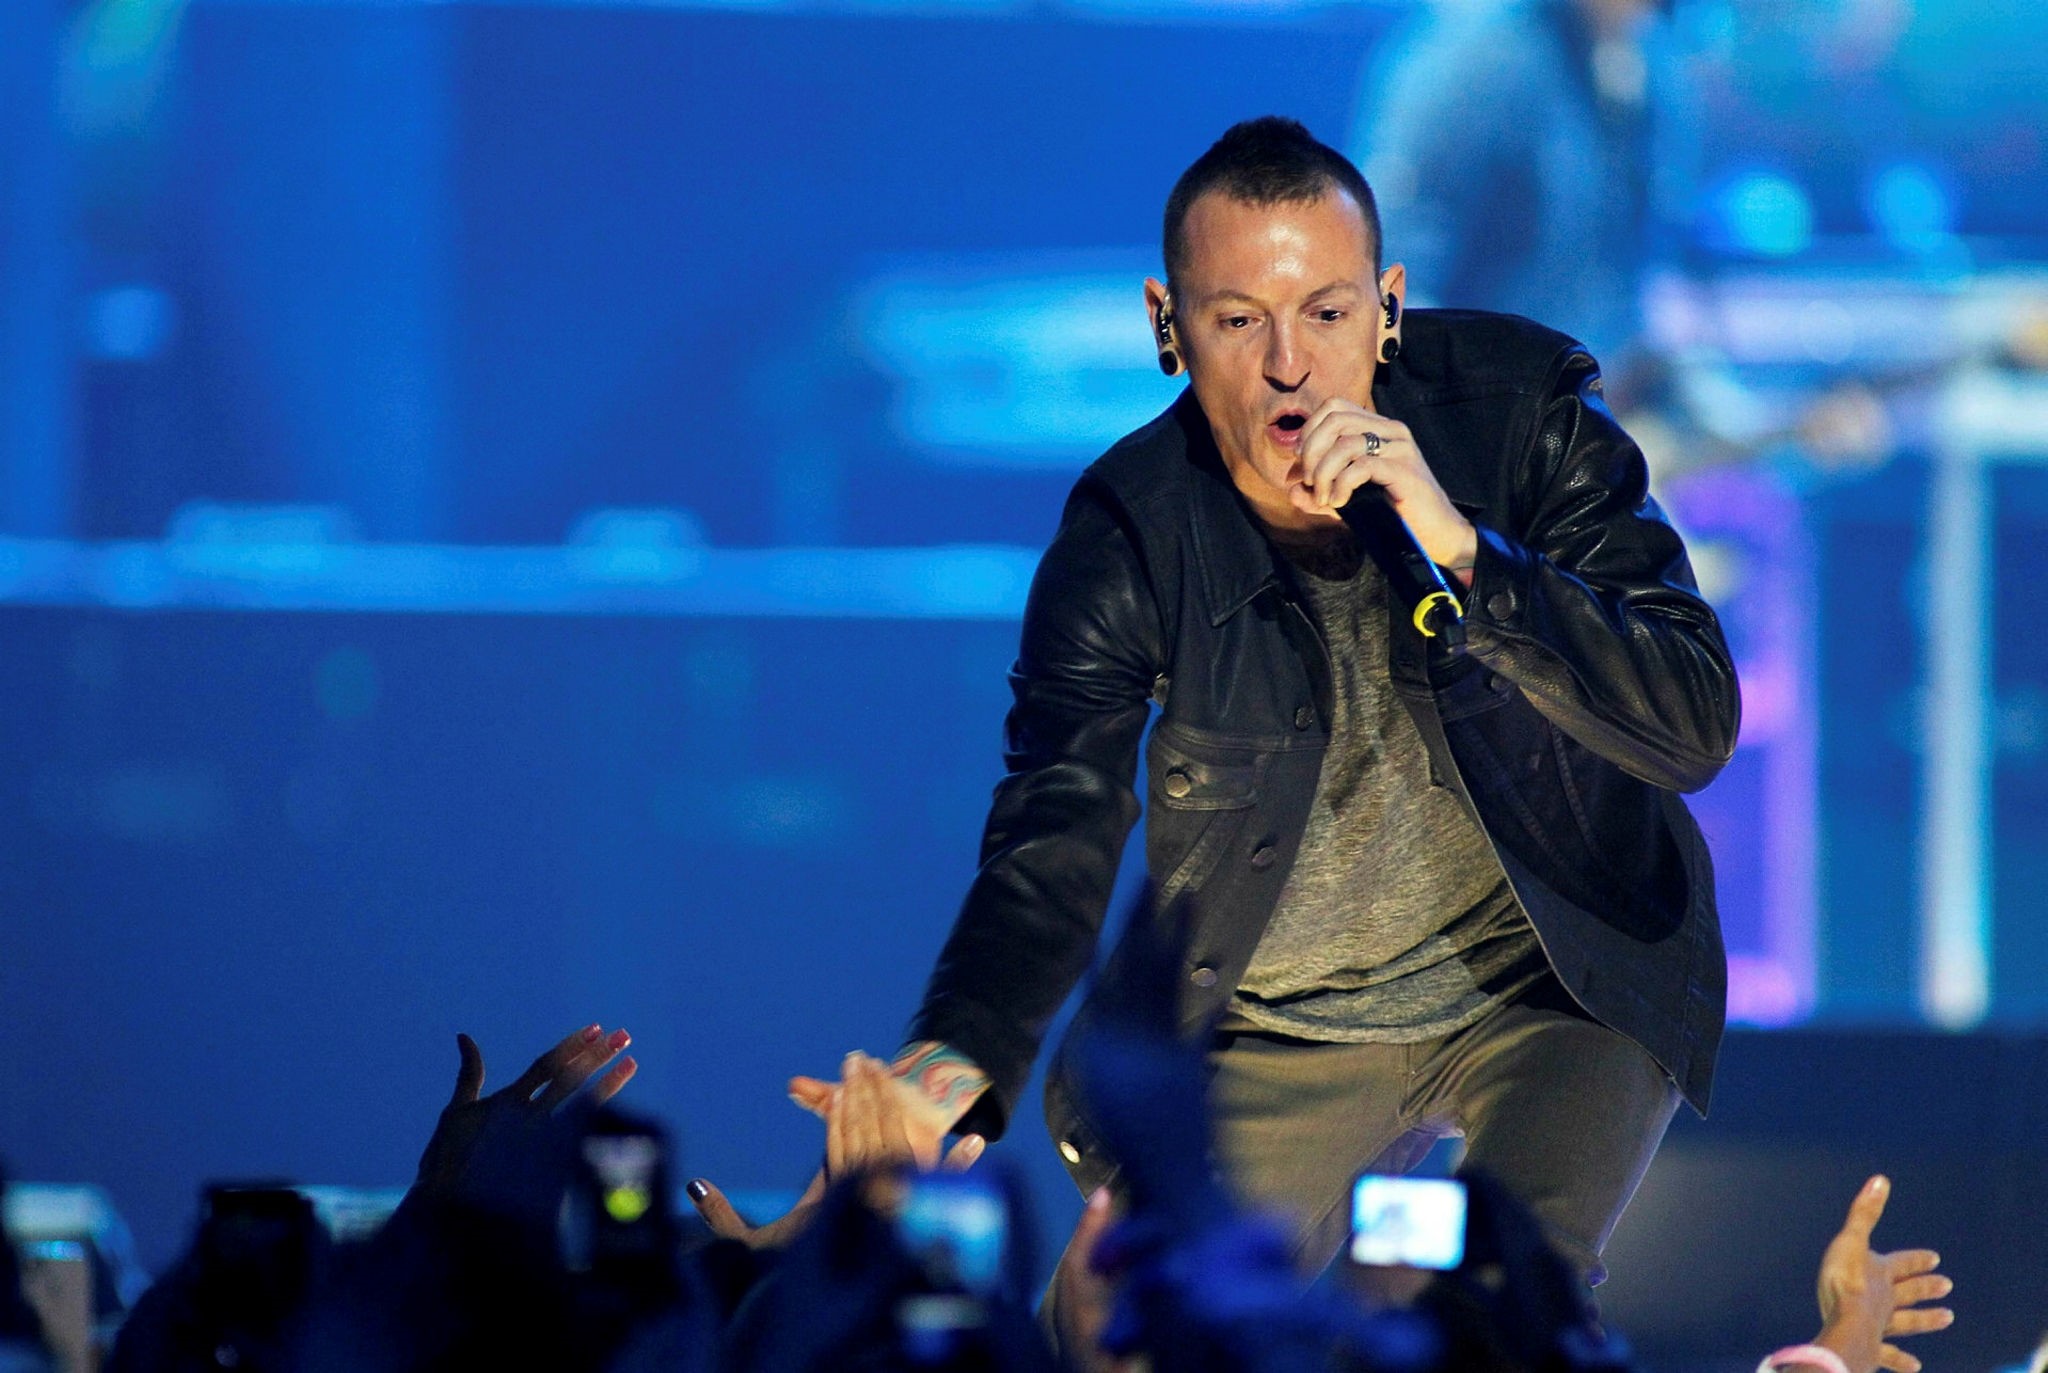 Chester Bennington of the band Linkin Park performs during the second day of the 2012 iHeartRadio Music Festival at the MGM Grand Garden Arena in Las Vegas, Nevada September 22, 2012. (Reuters Photo)